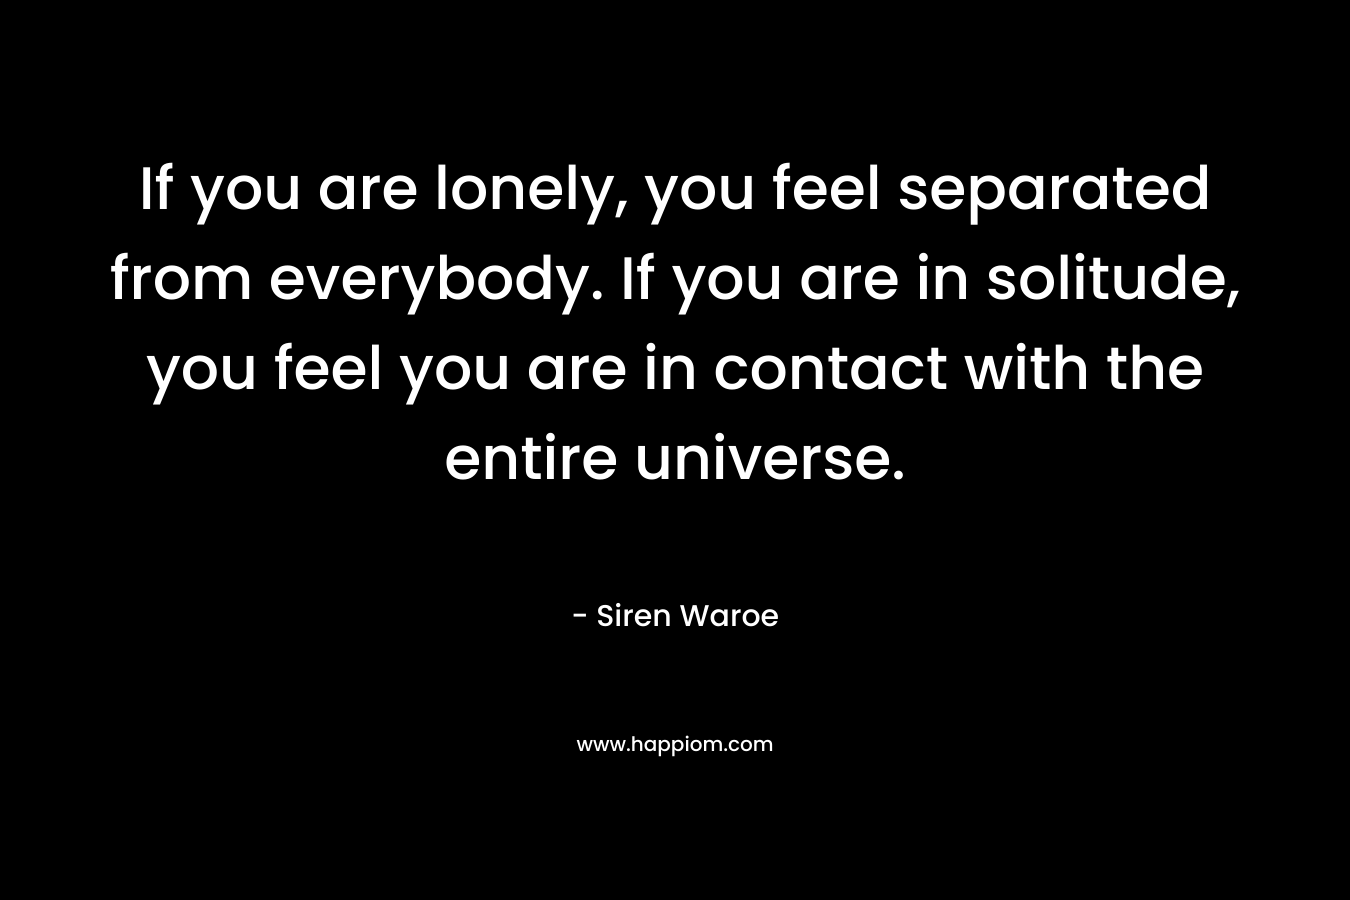 If you are lonely, you feel separated from everybody. If you are in solitude, you feel you are in contact with the entire universe. – Siren Waroe